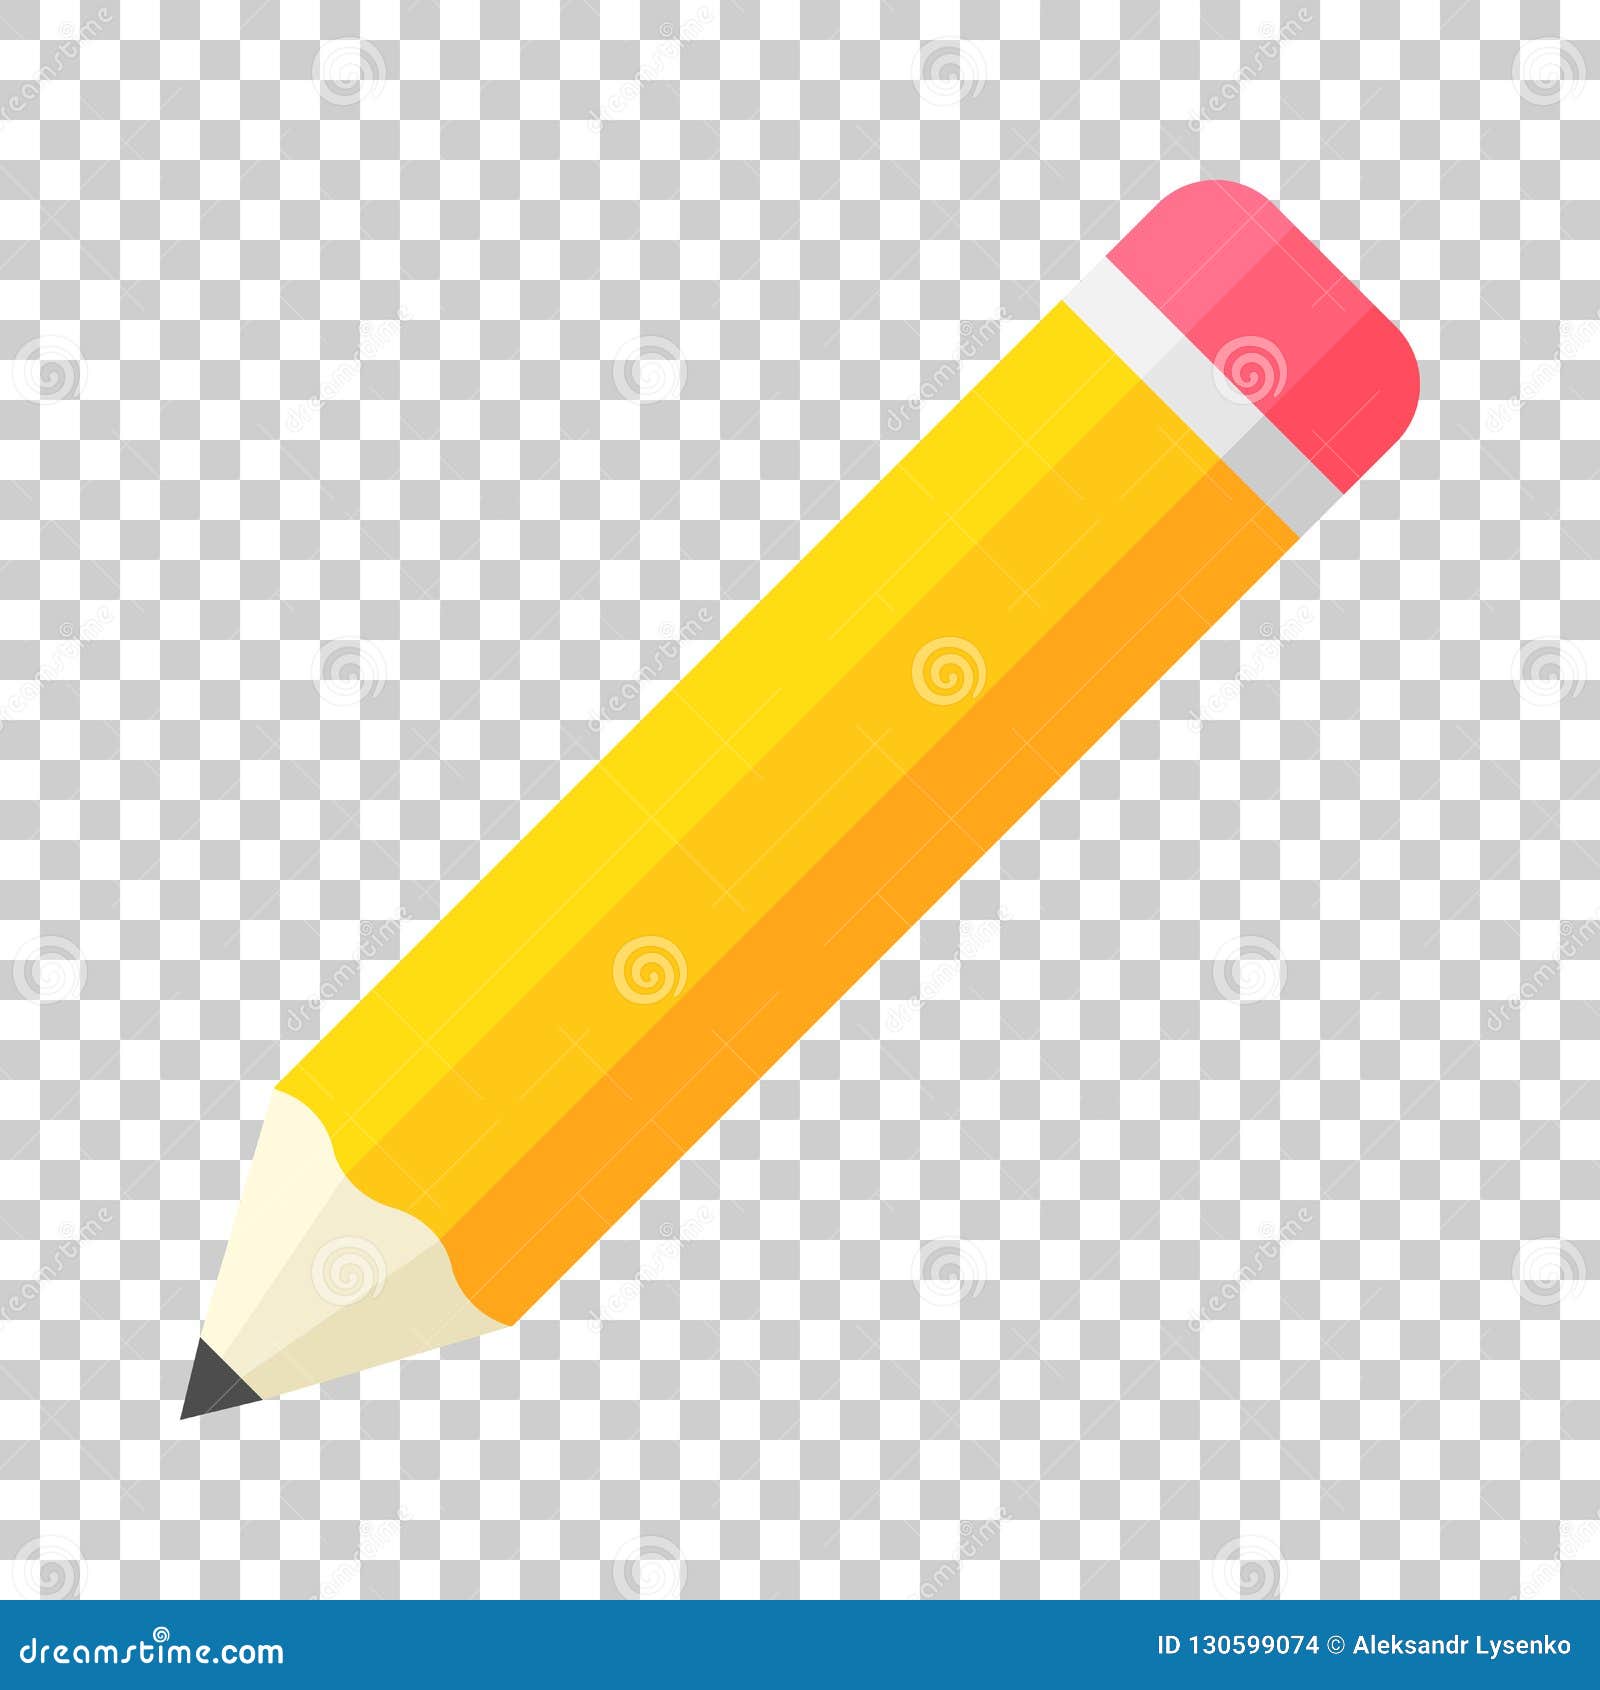 realistic yellow wooden pencil with rubber eraser icon in flat s